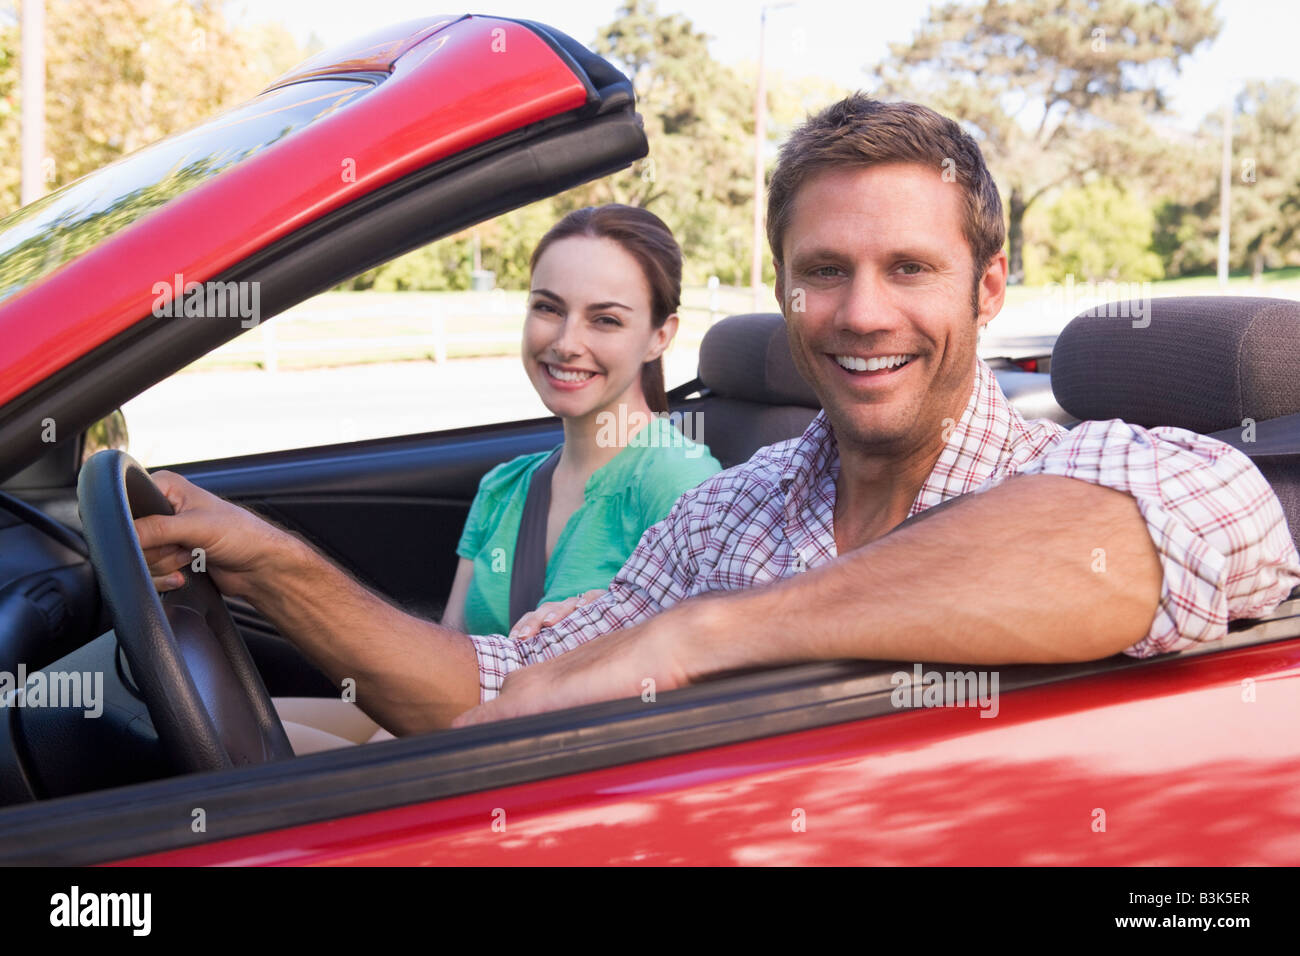 Couple in convertible car smiling Stock Photo - Alamy